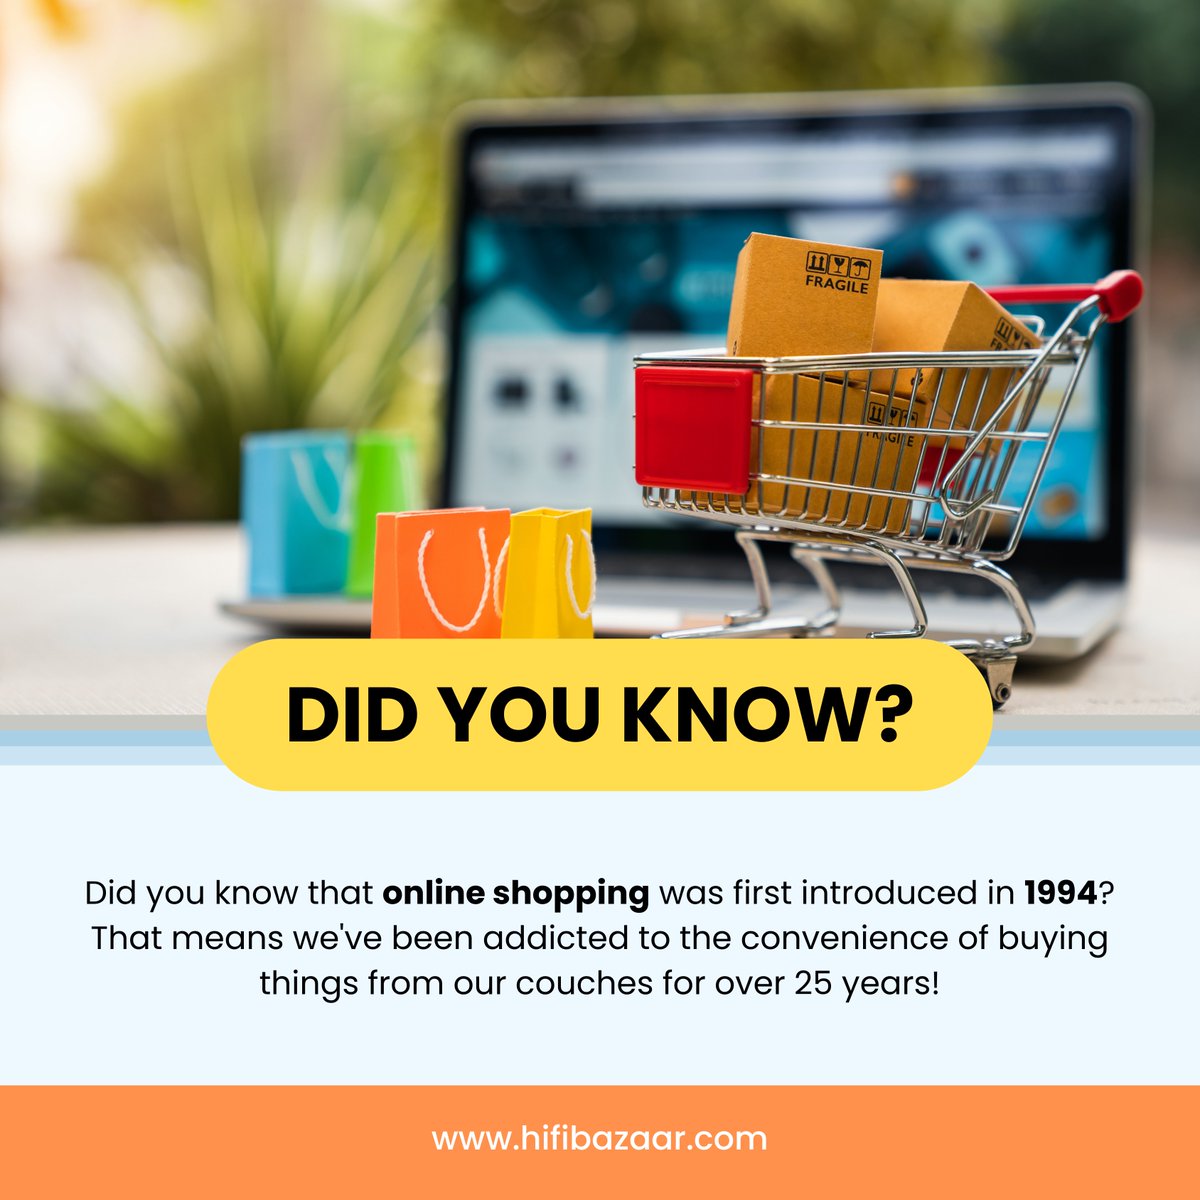 🛍️💻 Drop a comment with your favorite online shopping hack or story below!

#hifibazaar #DidYouKnow #onlineshopping #onlineshoppingaddict #factsdaily #shopping #onlineshoppingindia